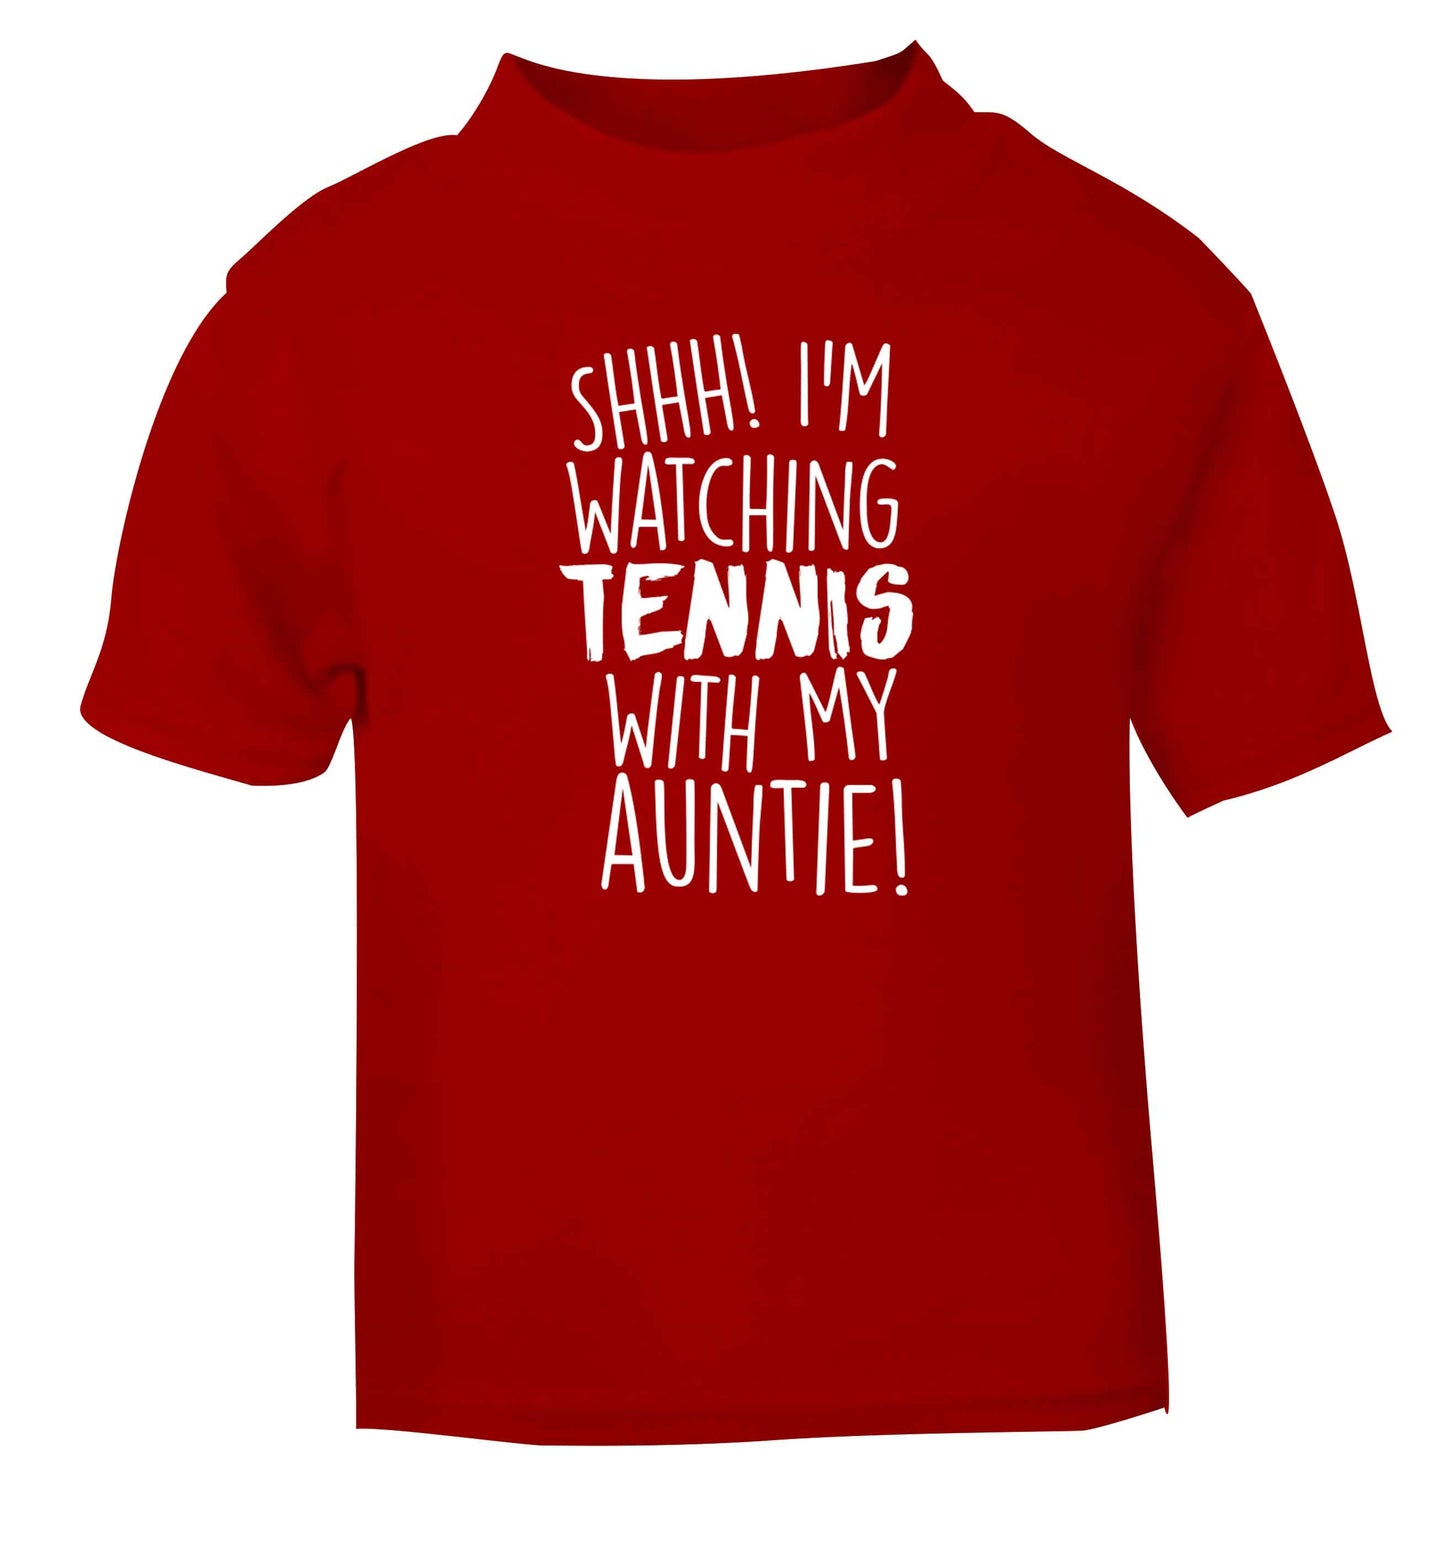 Shh! I'm watching tennis with my auntie! red Baby Toddler Tshirt 2 Years